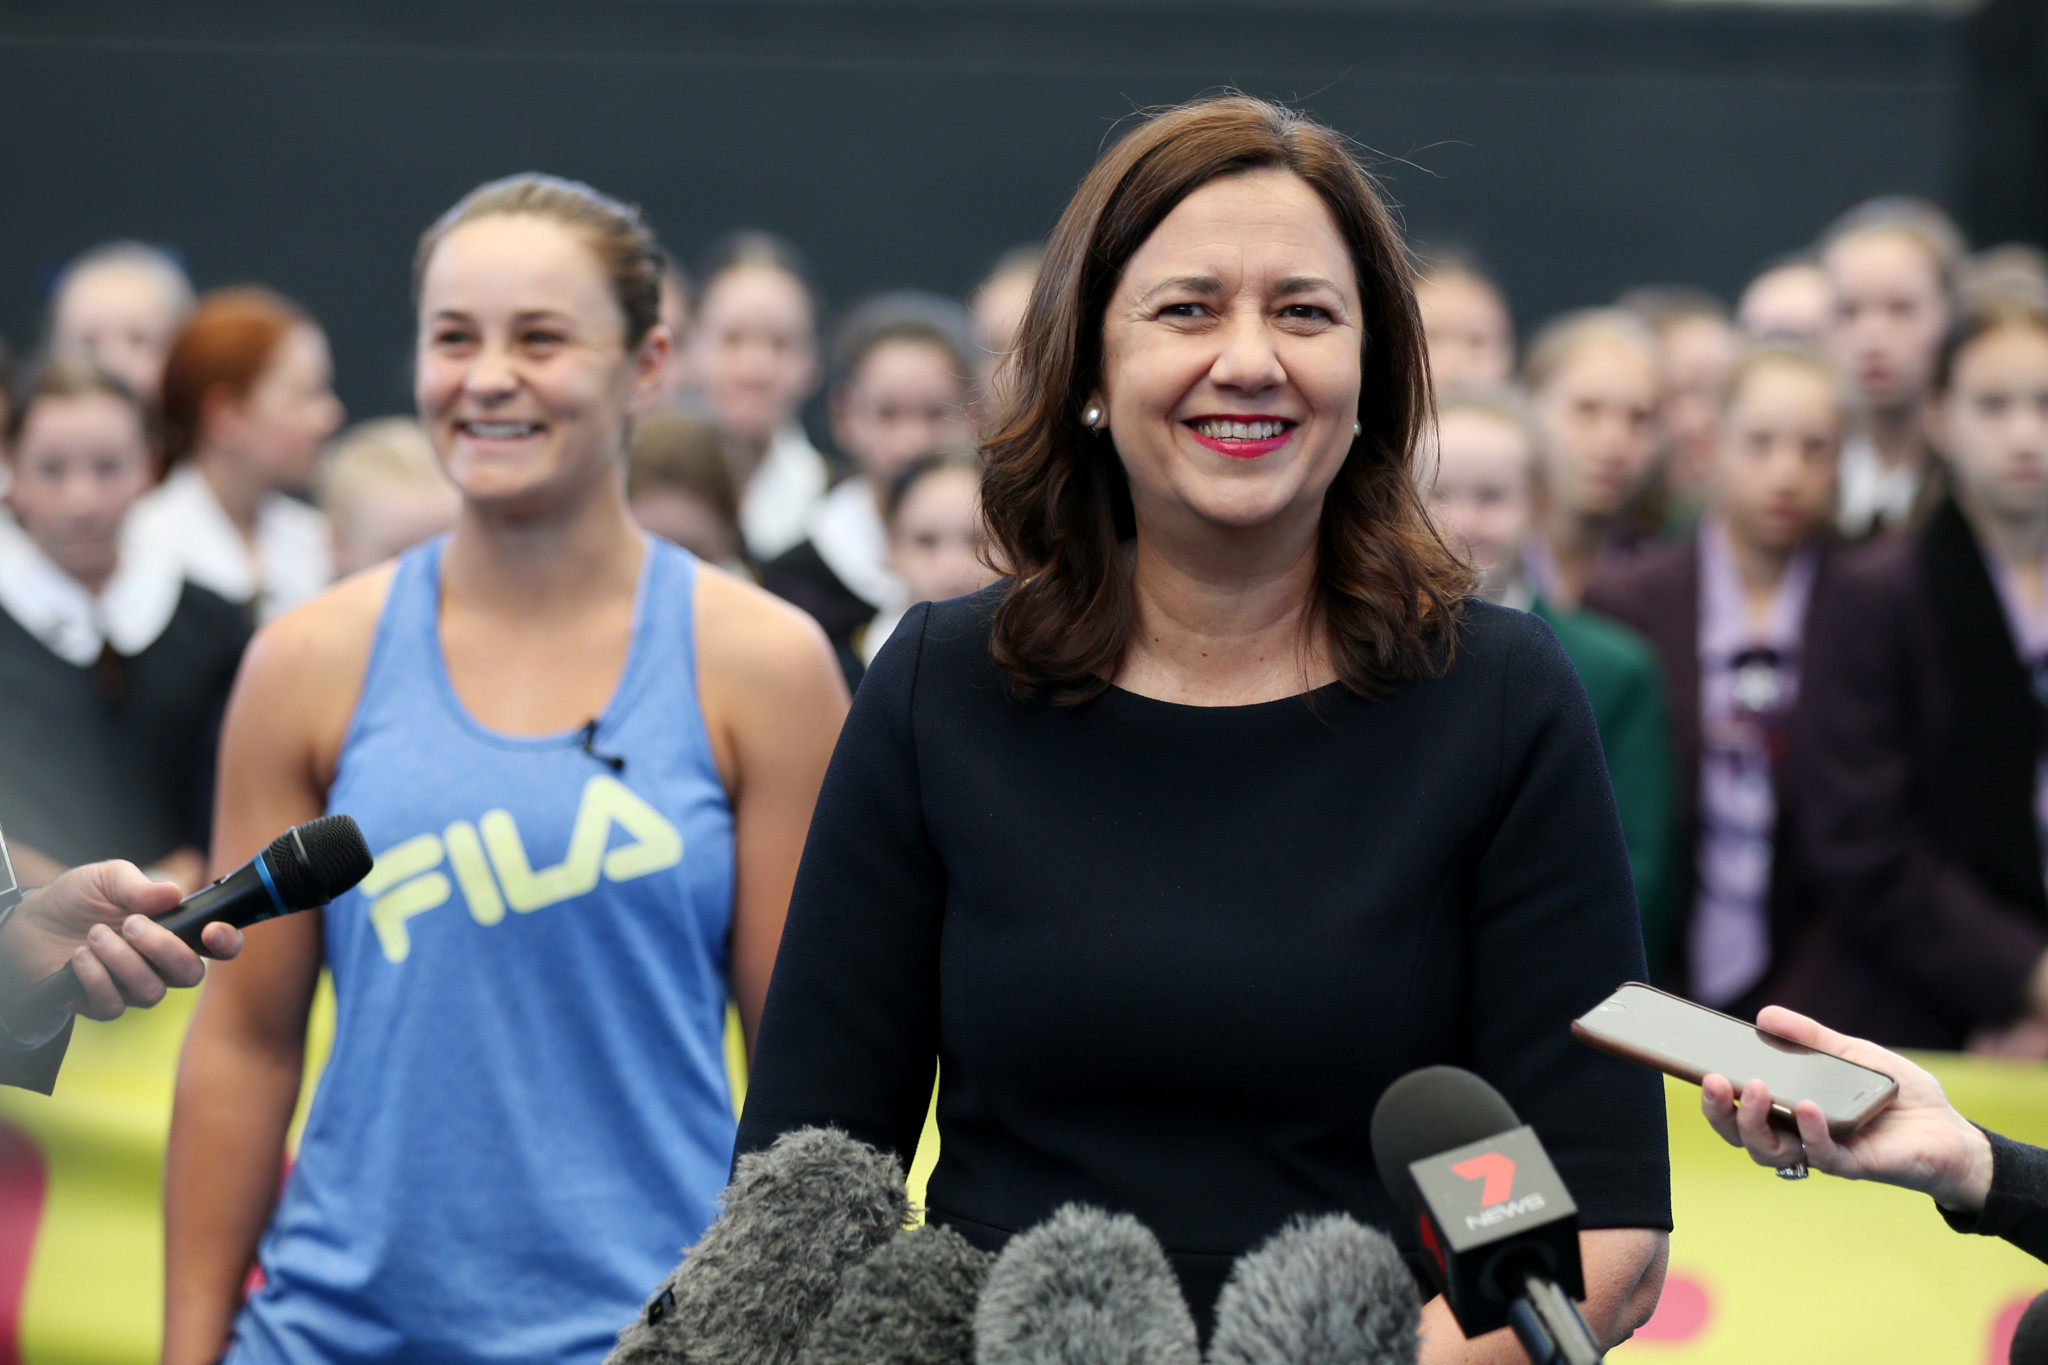 Queensland Premier Annastacia Palaszczuk claimed the economic benefits from hosting the Games would be 